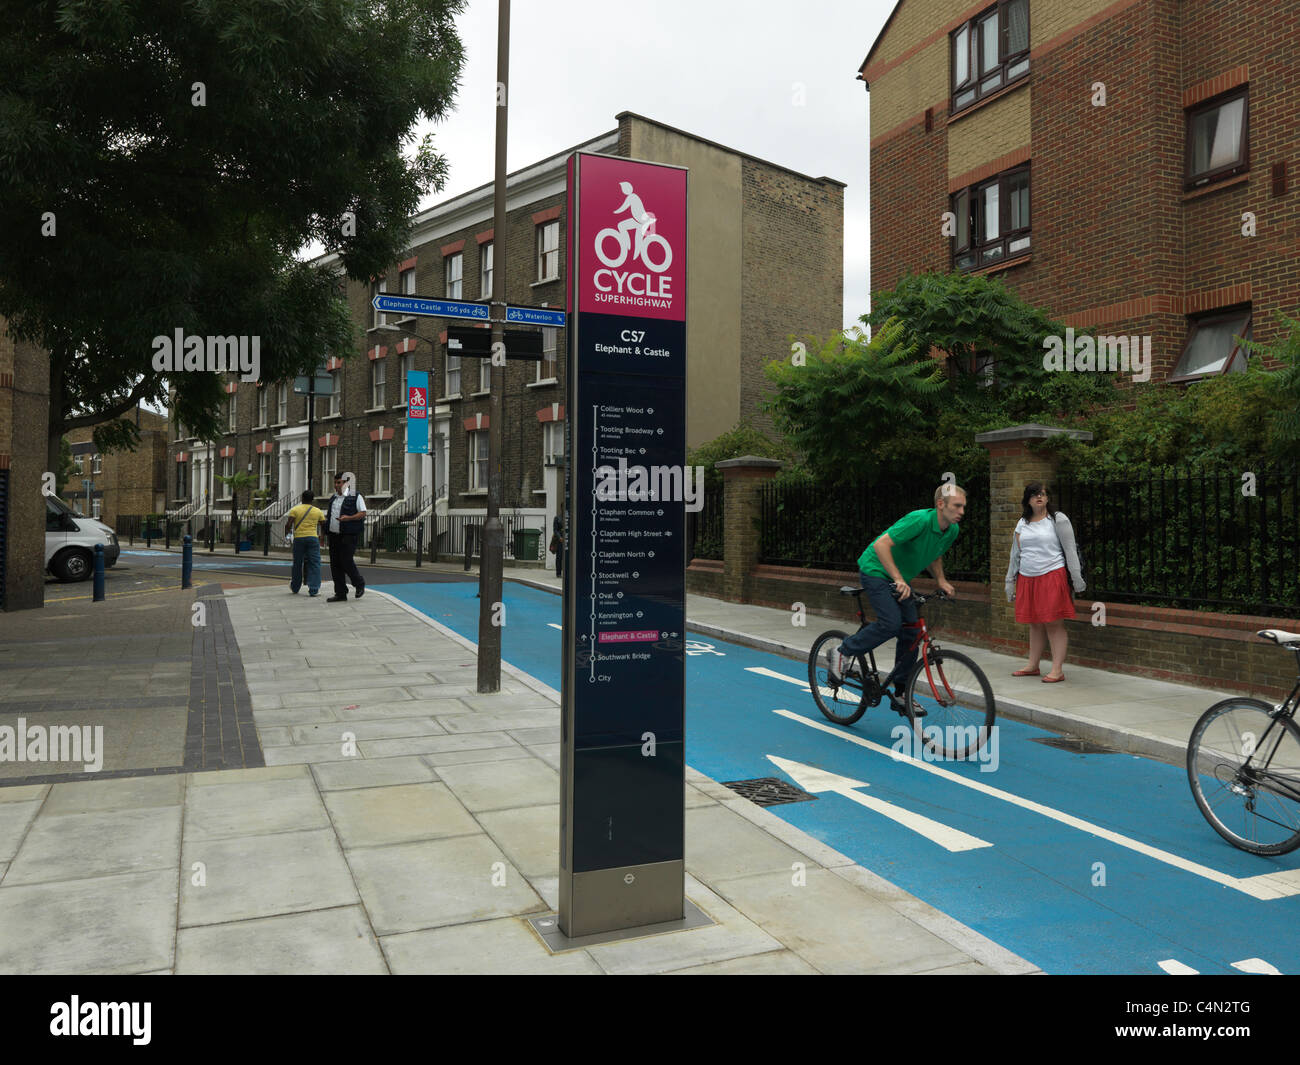 london-england-elephant-and-castle-people-cycling-on-the-cycle-superhighway-C4N2TG.jpg